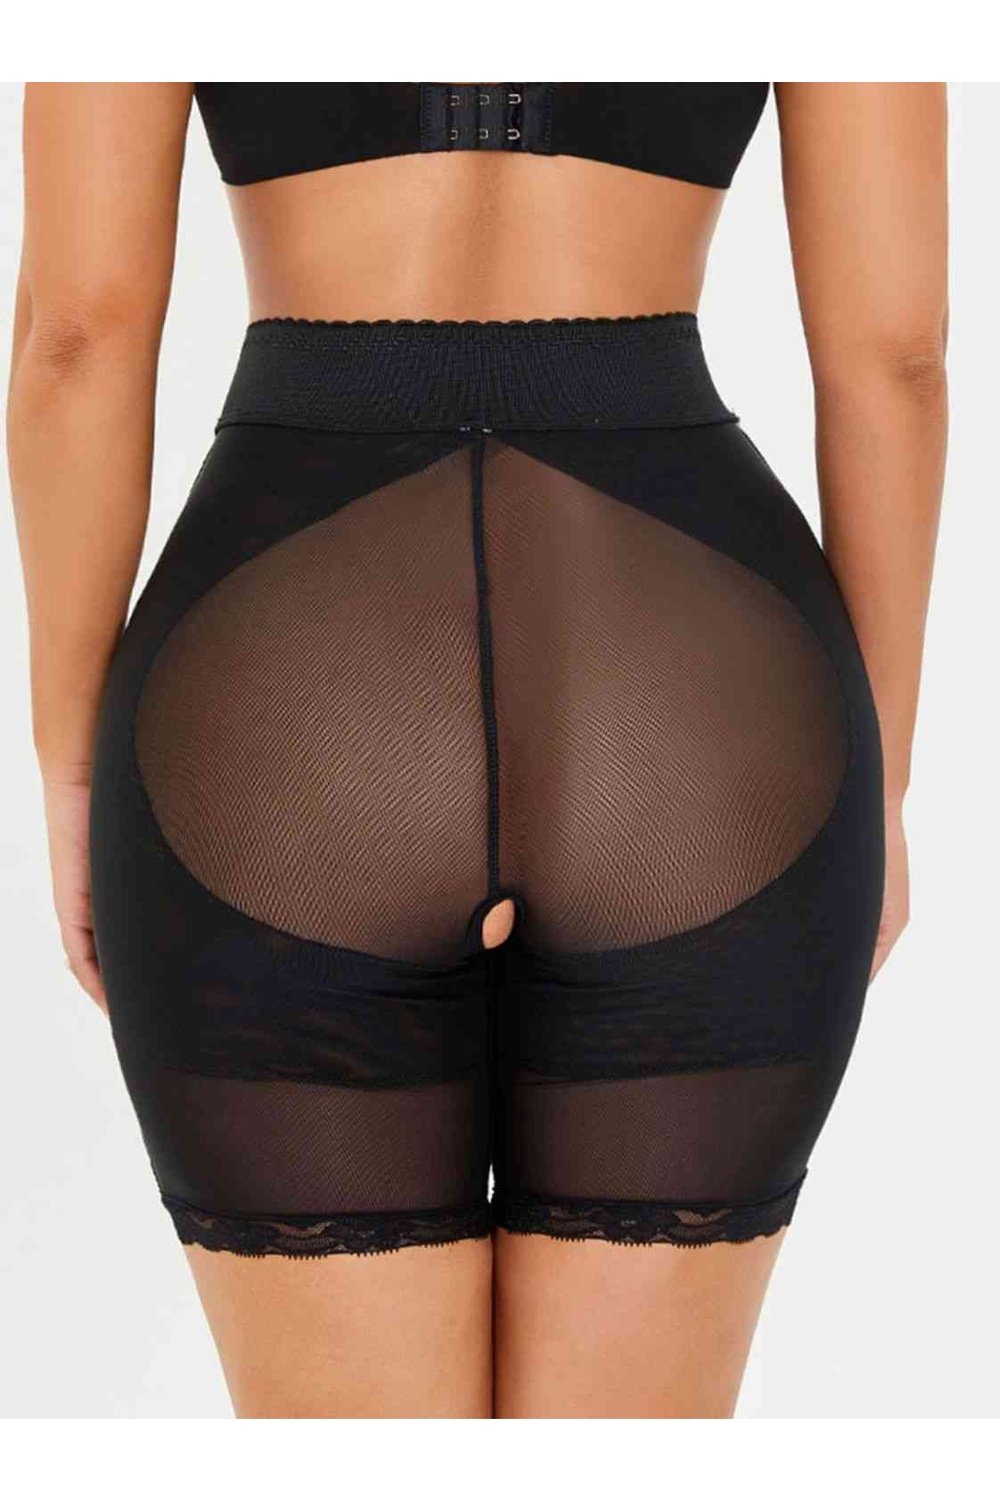 Full Size High-Waisted Lace Trim Shaping Shorts - Shapewear - FITGGINS